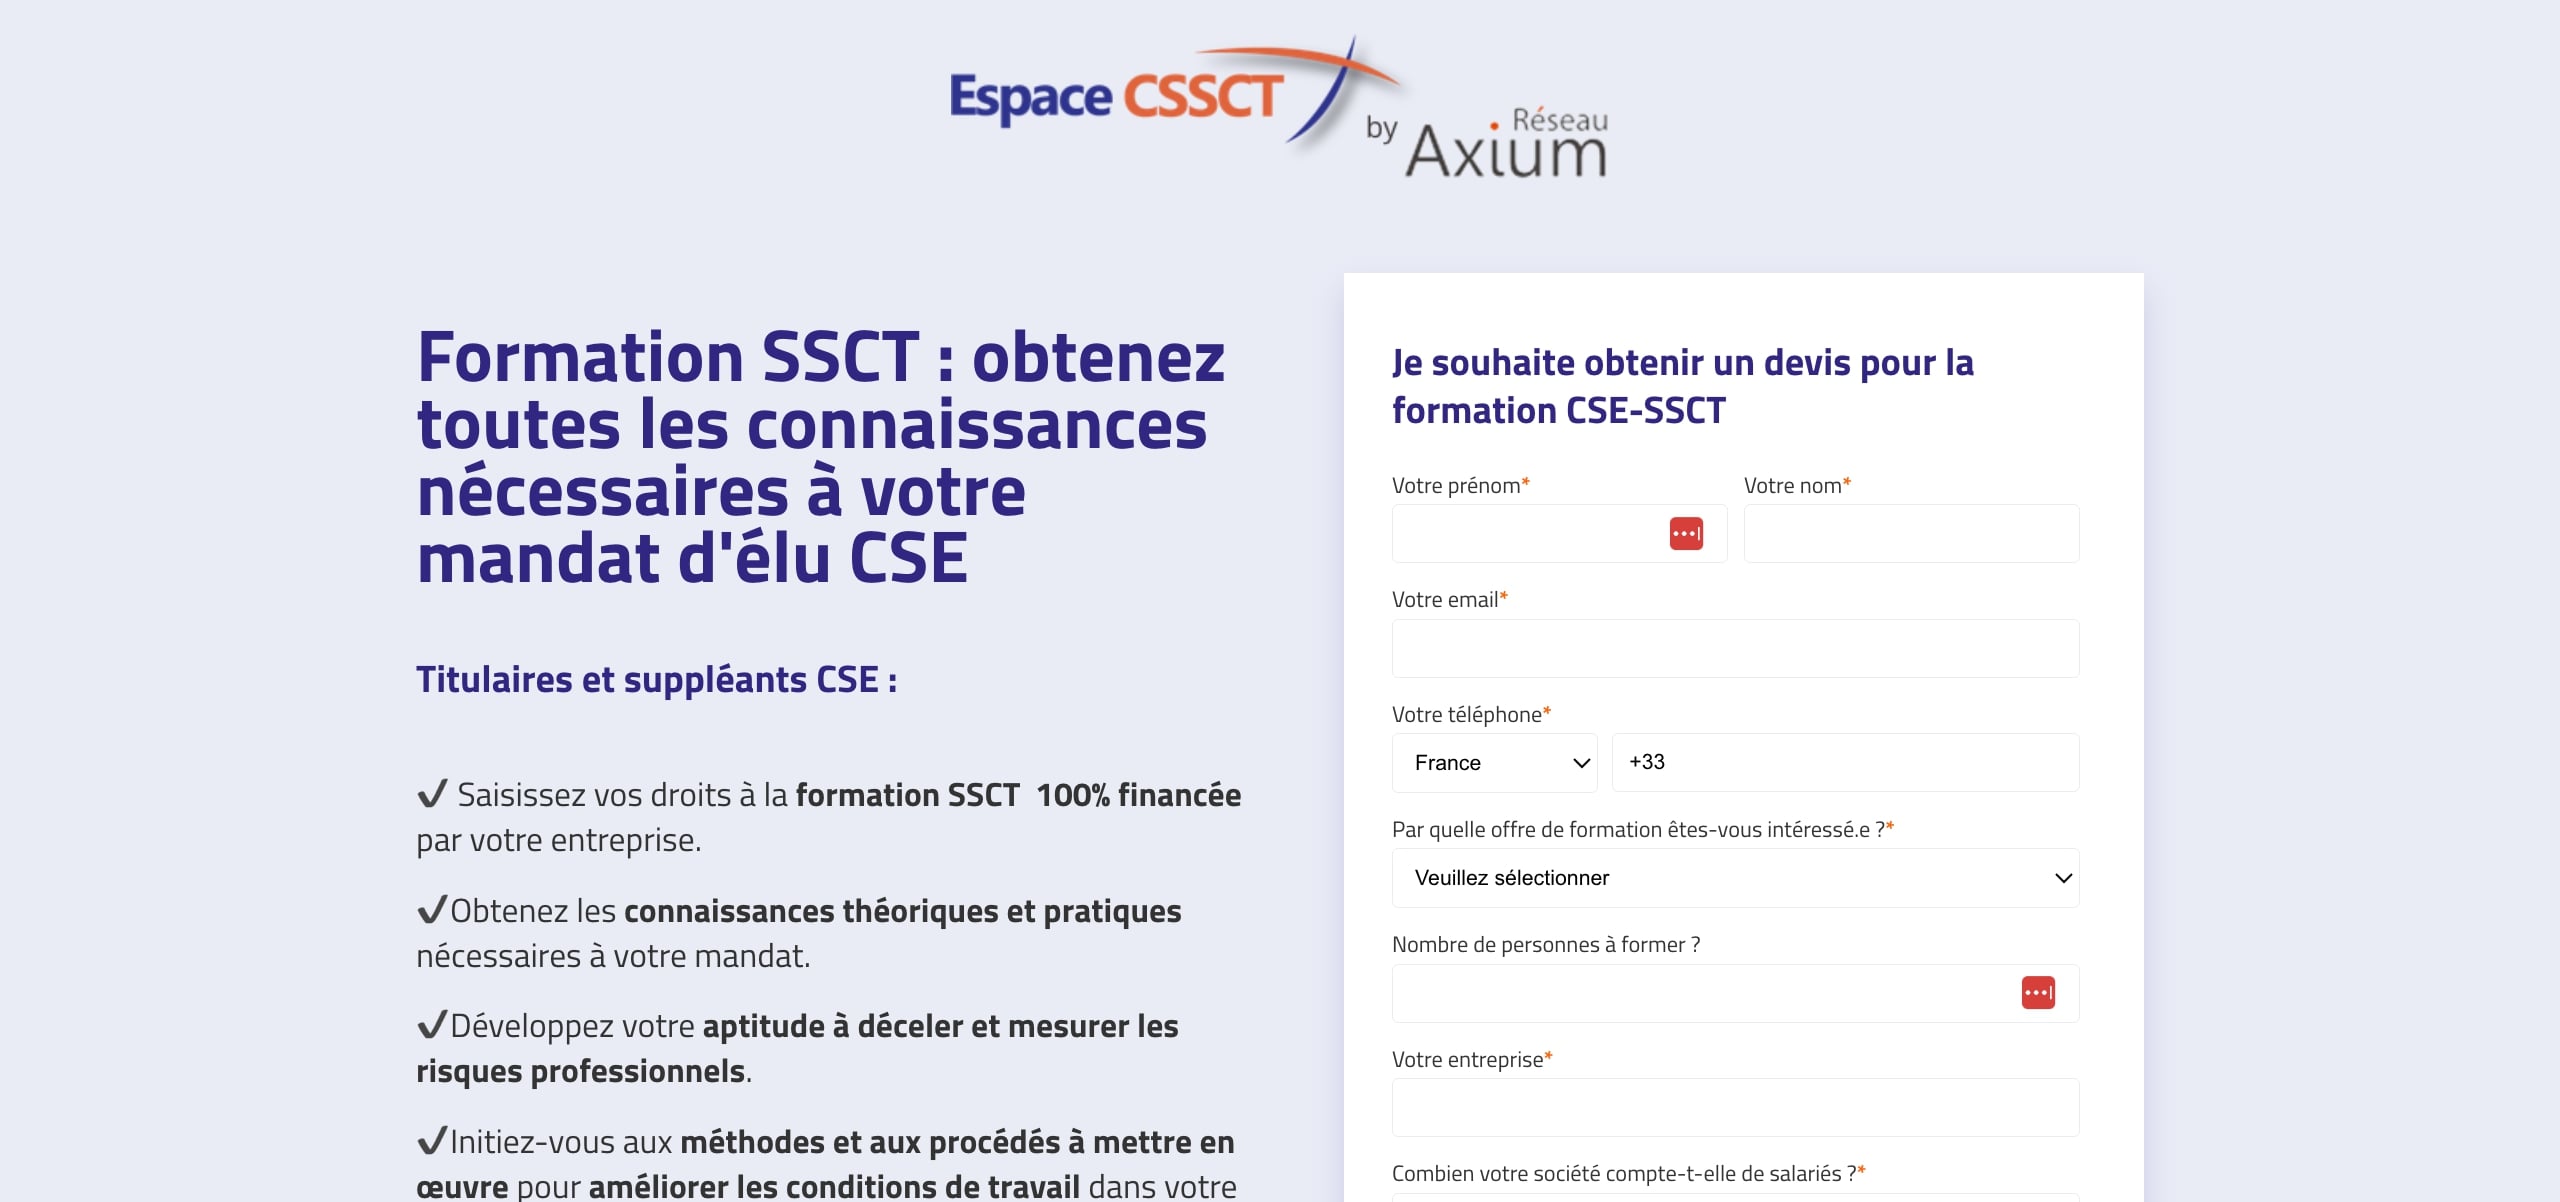 landing page espace cssct